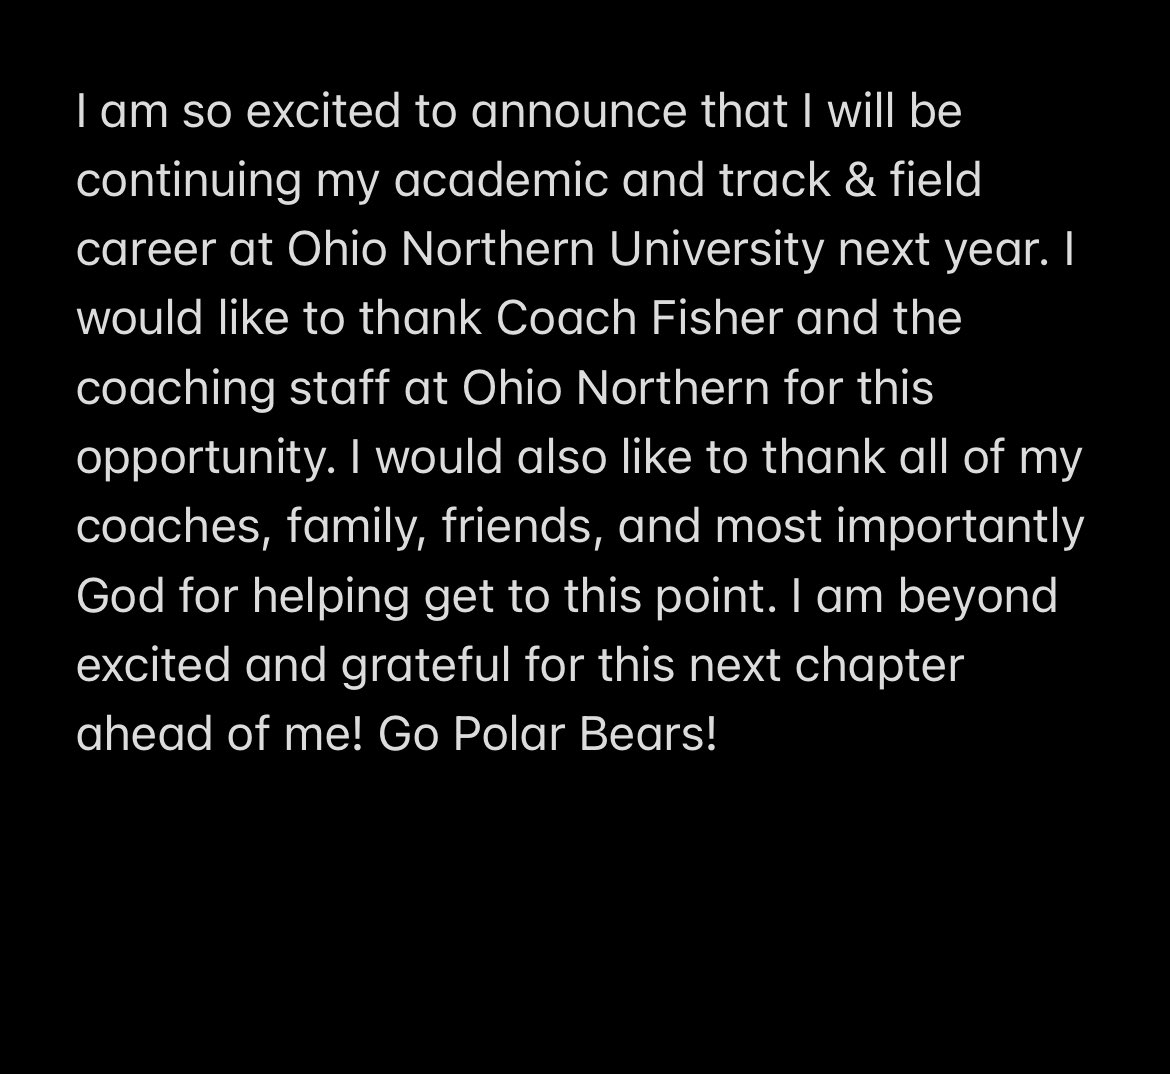 I am so excited to announce that I will be continuing my academic and track & field career at Ohio Northern University next year. Go Polar Bears! #alltheglorytoGod #gopolarbears